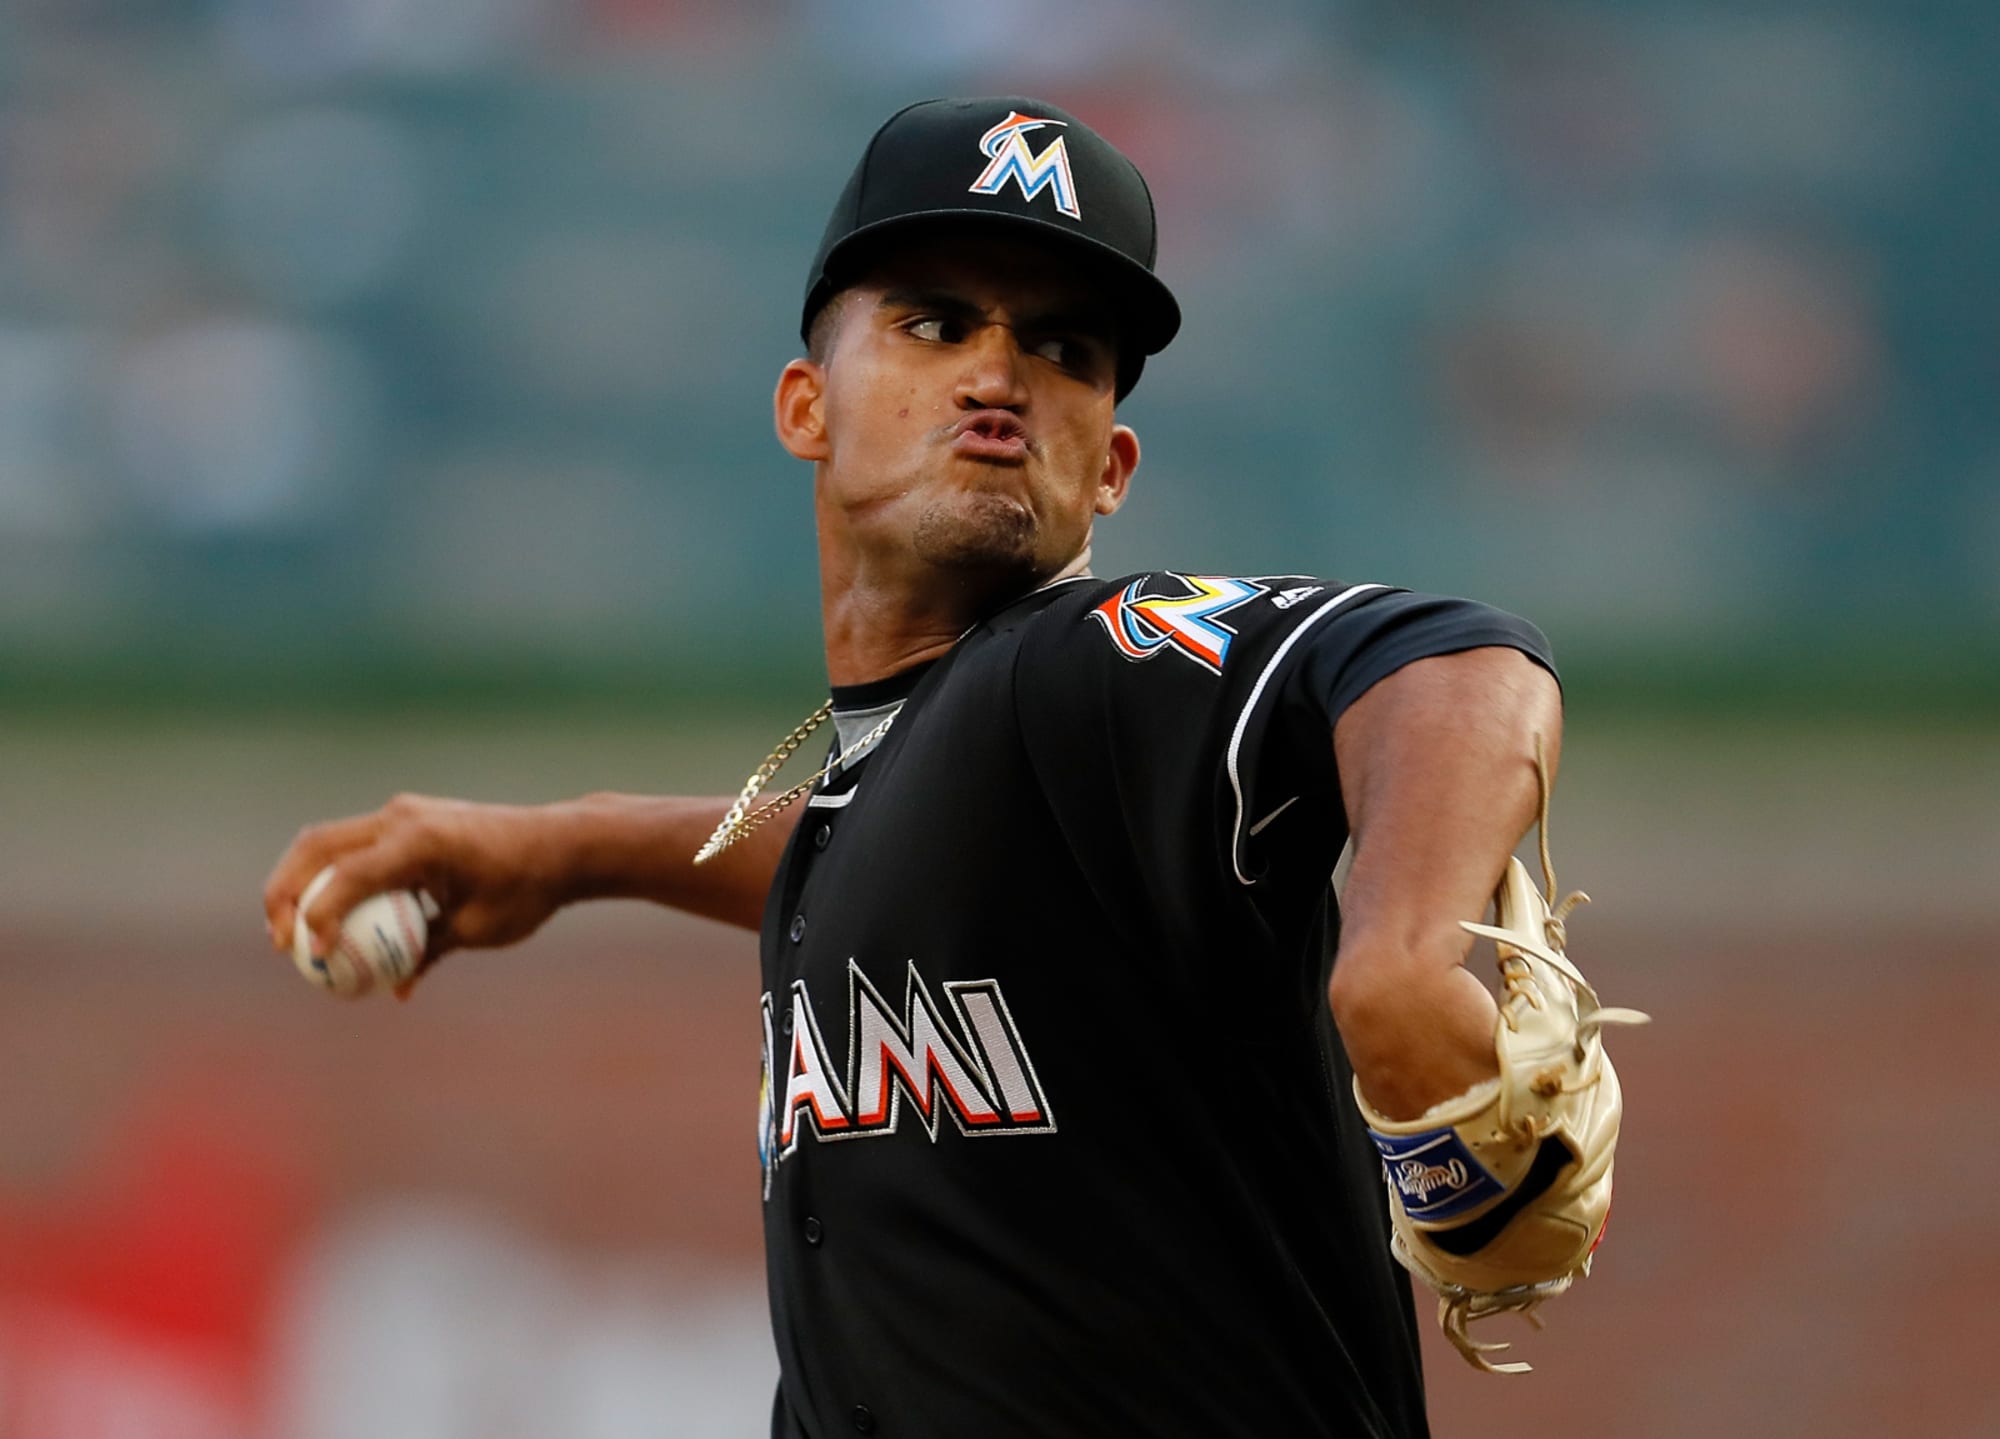 Miami Marlins Spring Training What Will the Bullpen Look Like?